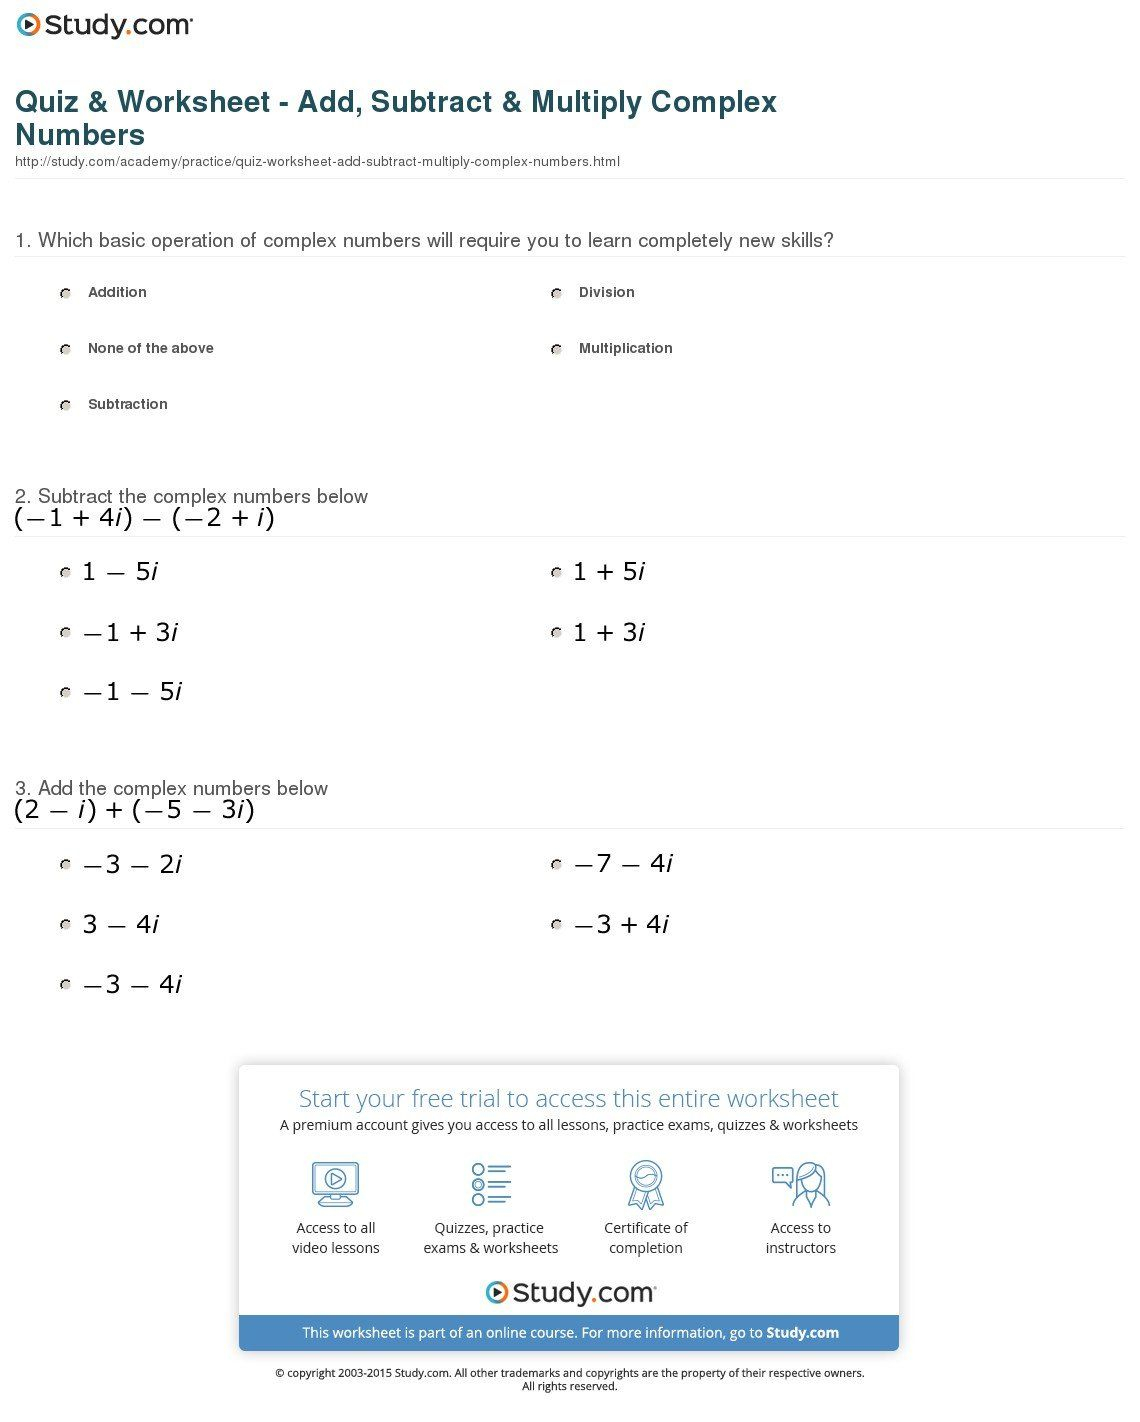 complex-numbers-adding-and-subtracting-worksheet-2022-numbersworksheets